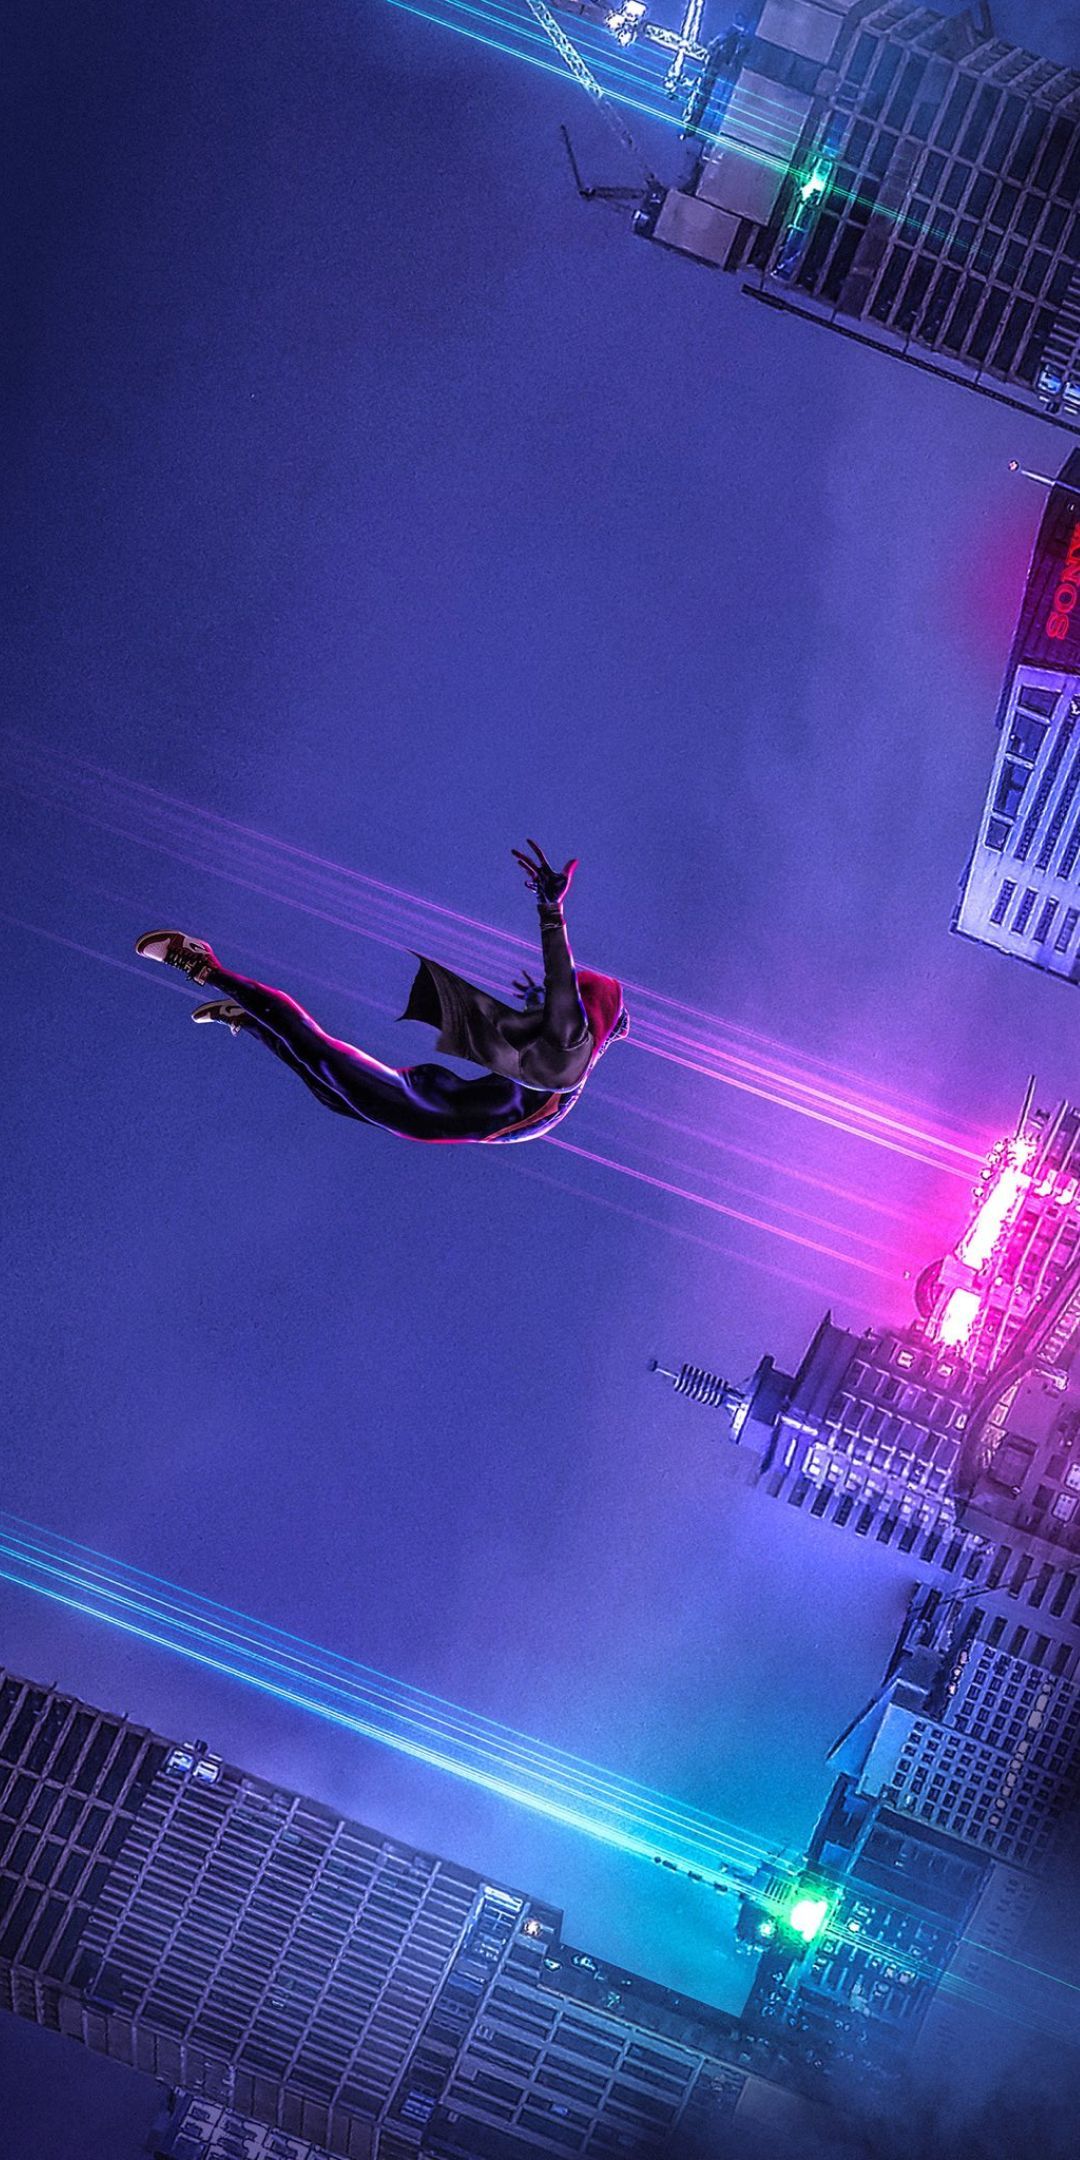 IPhone wallpaper with Spiderman flying through the air - 